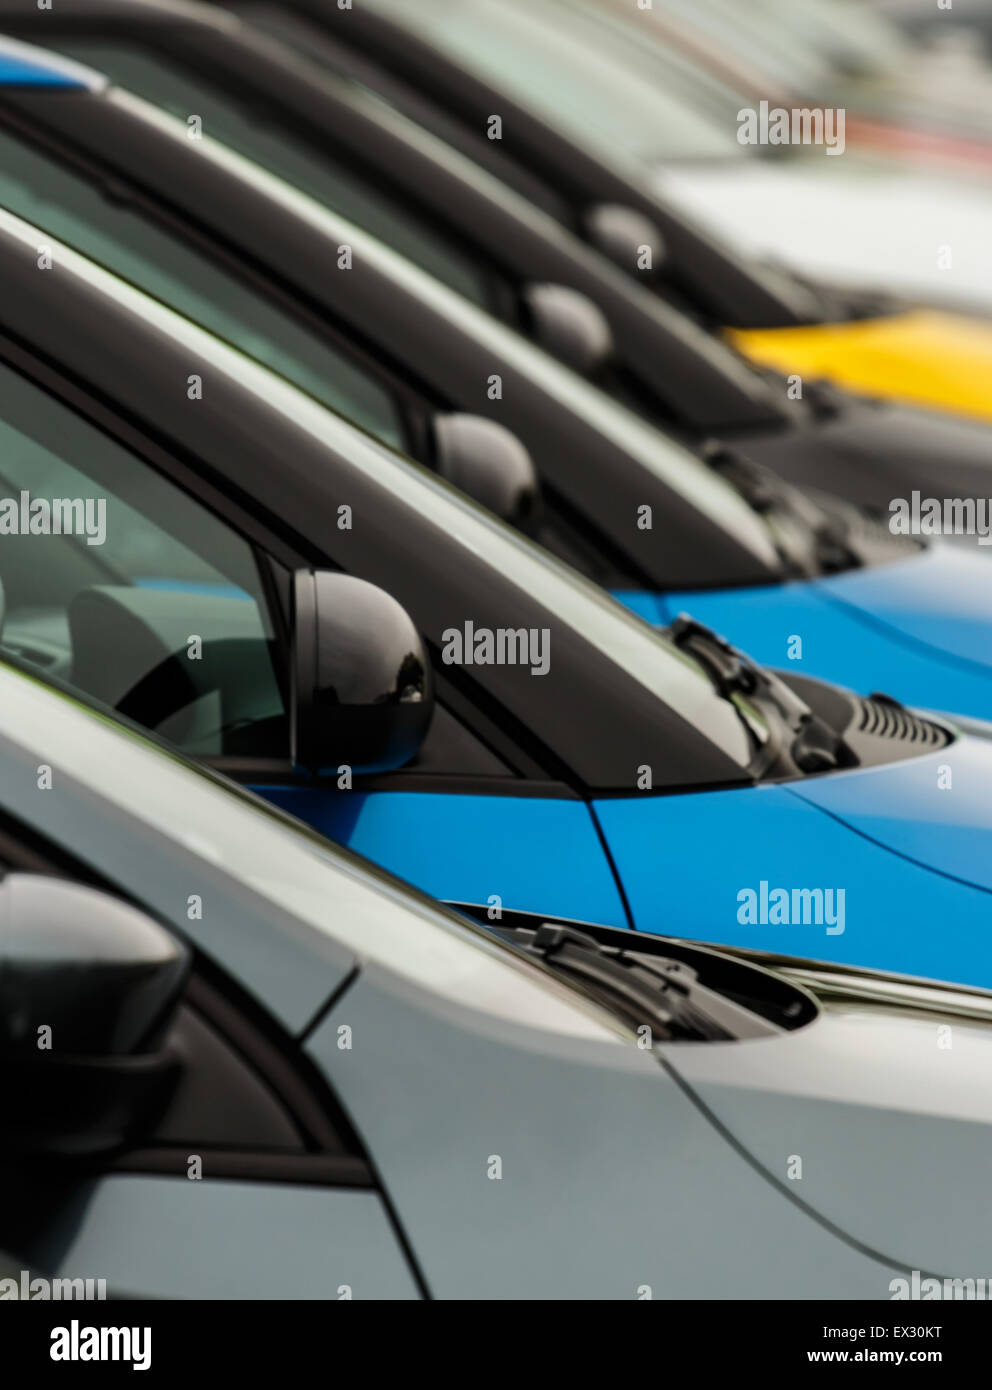 Vehicles for sale parked in a row with close up detail on the wing mirror without focus on any particular model making the cars  Stock Photo